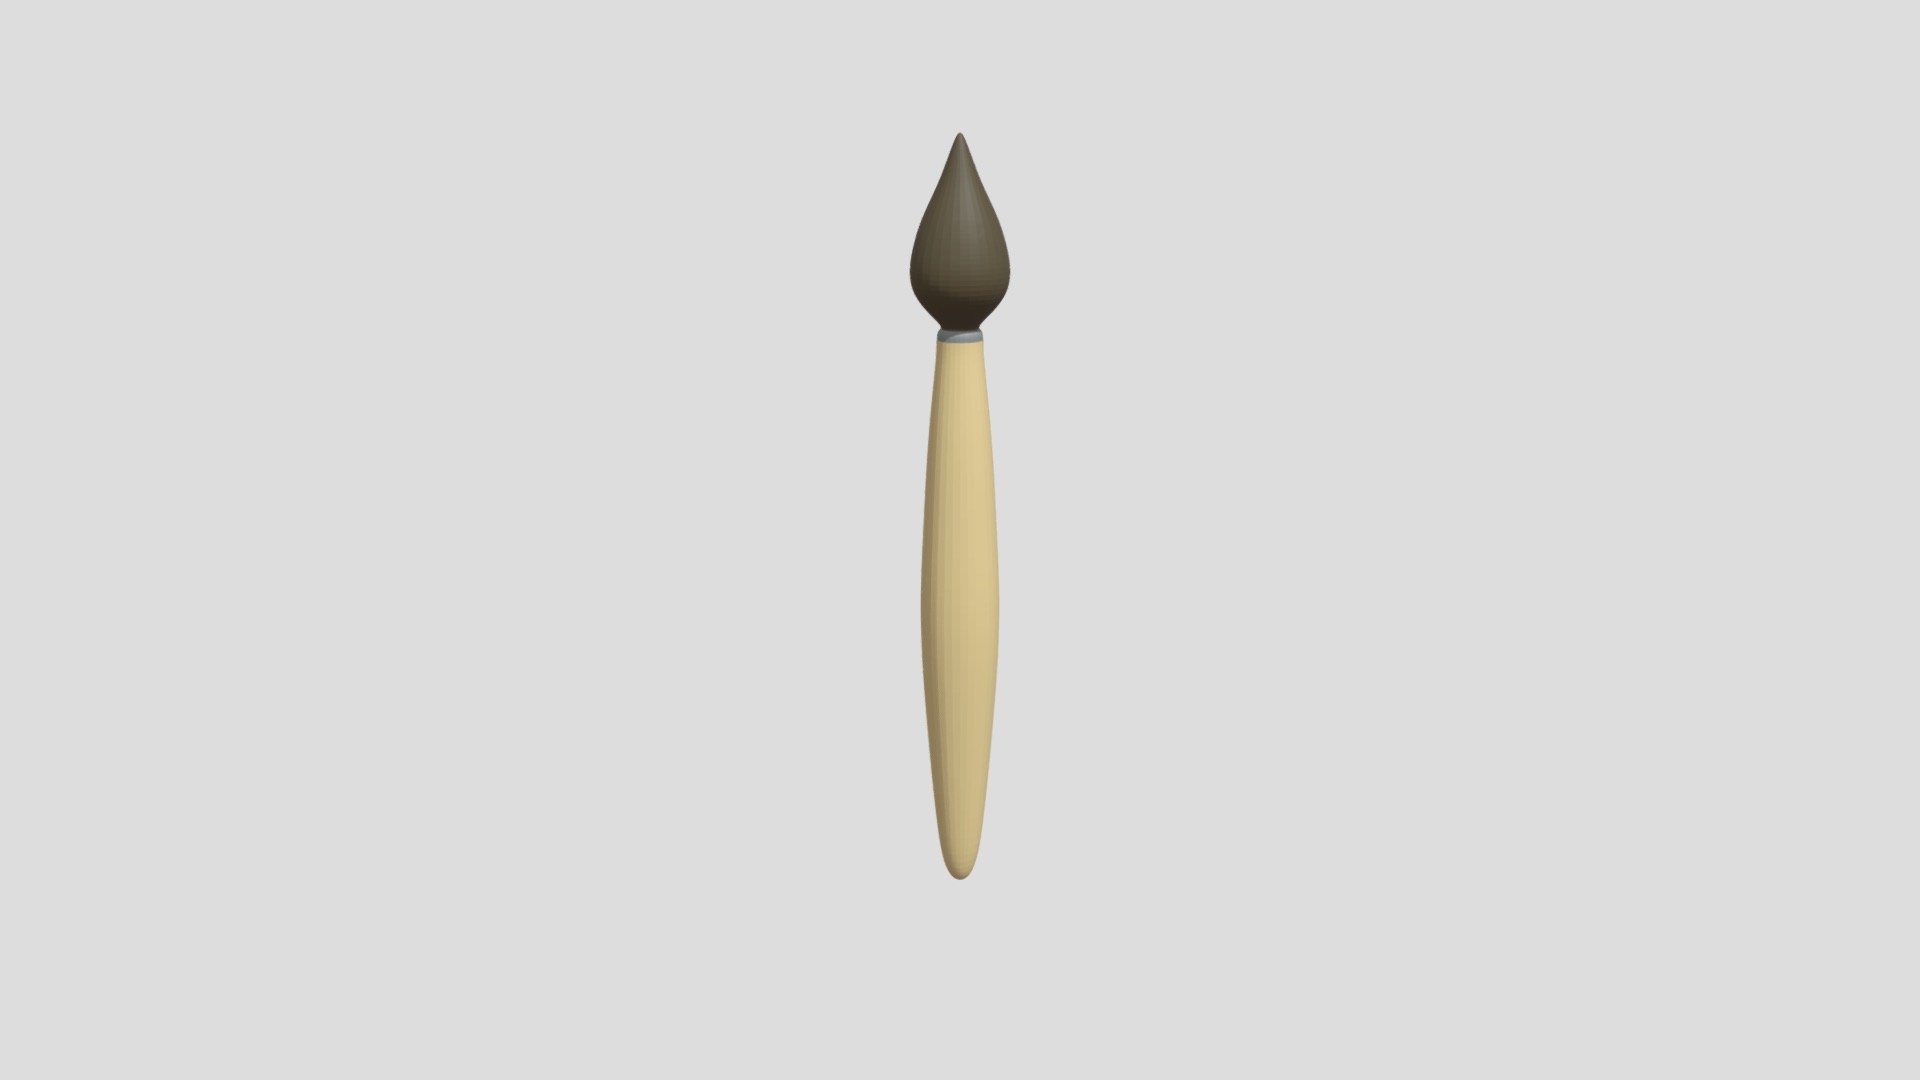 Subdivision: 2

Textures: 1024 x 1024, 4 colors on texture - Brown, Grey, White, Yellow.

Two textures: With white tip and without.

Materials: 1

Rigged 

Formats: STL, OBJ, FBX, DAE, 3DS, X3D.

Origin located on middle-center 

Polygons: 8390

Vertices: 4197

I hope you enjoy the model 3d model